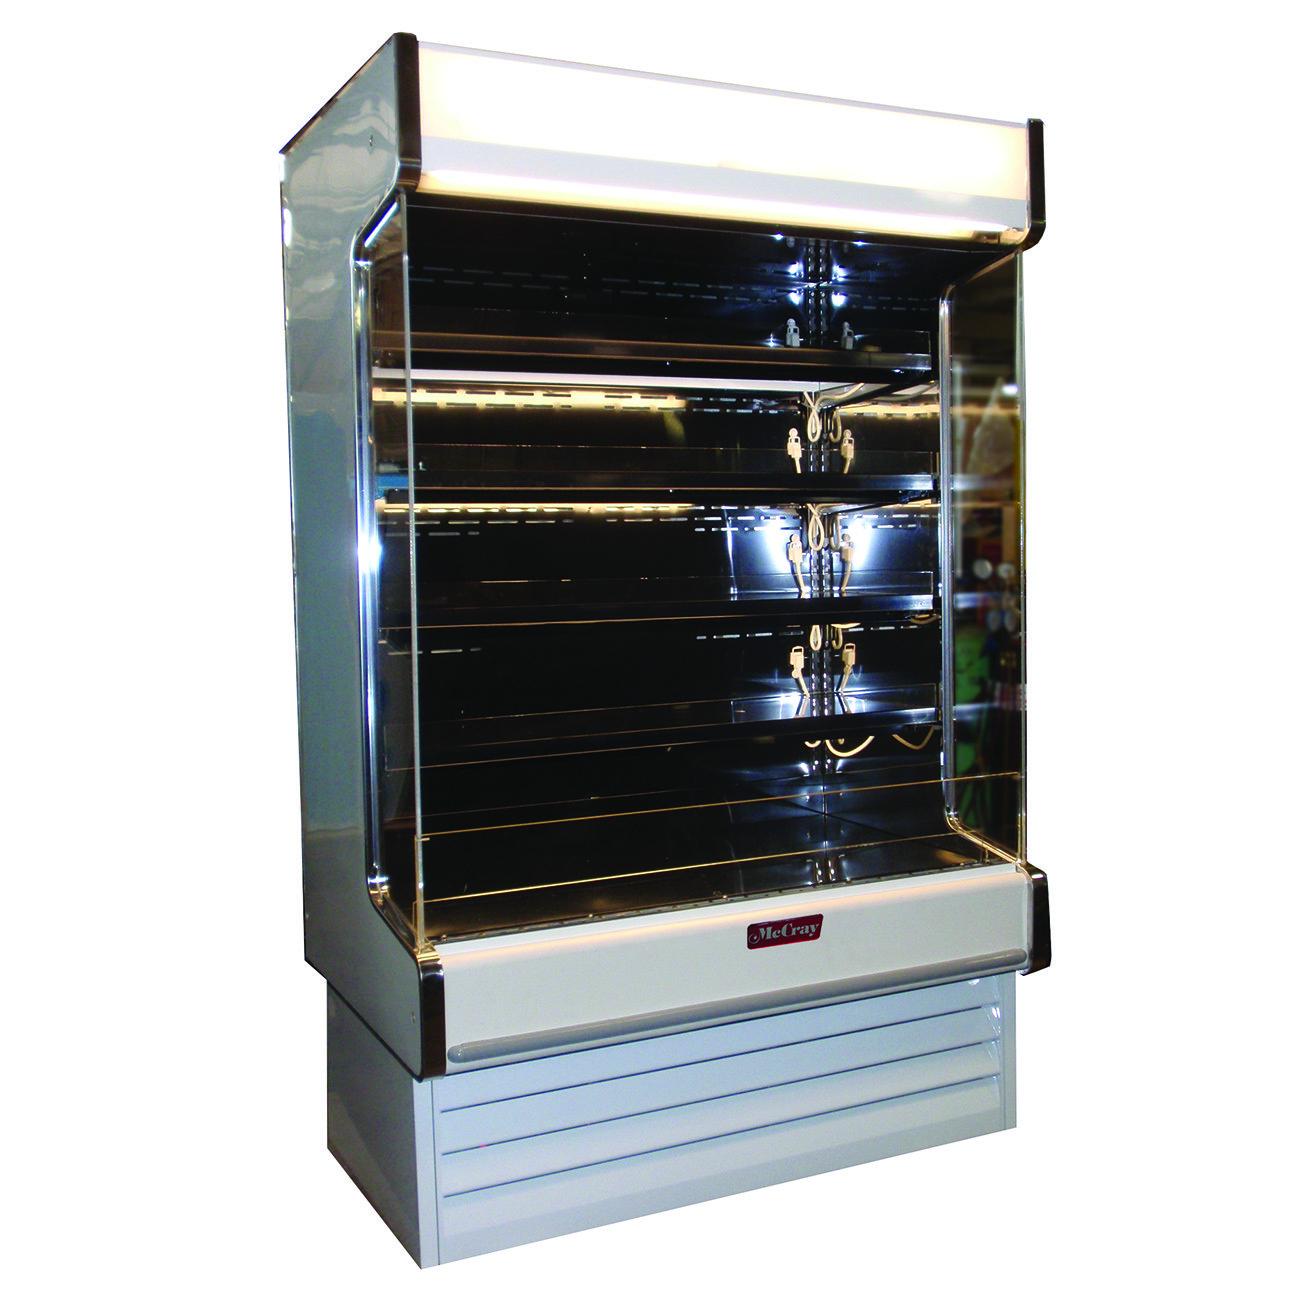 Howard-McCray SC-OD35E-6-B-LED-LC 75'' Vertical Dairy Open Air Merchandiser in Black, Self-Contained, 4 Shelves, w/ LED Lighting